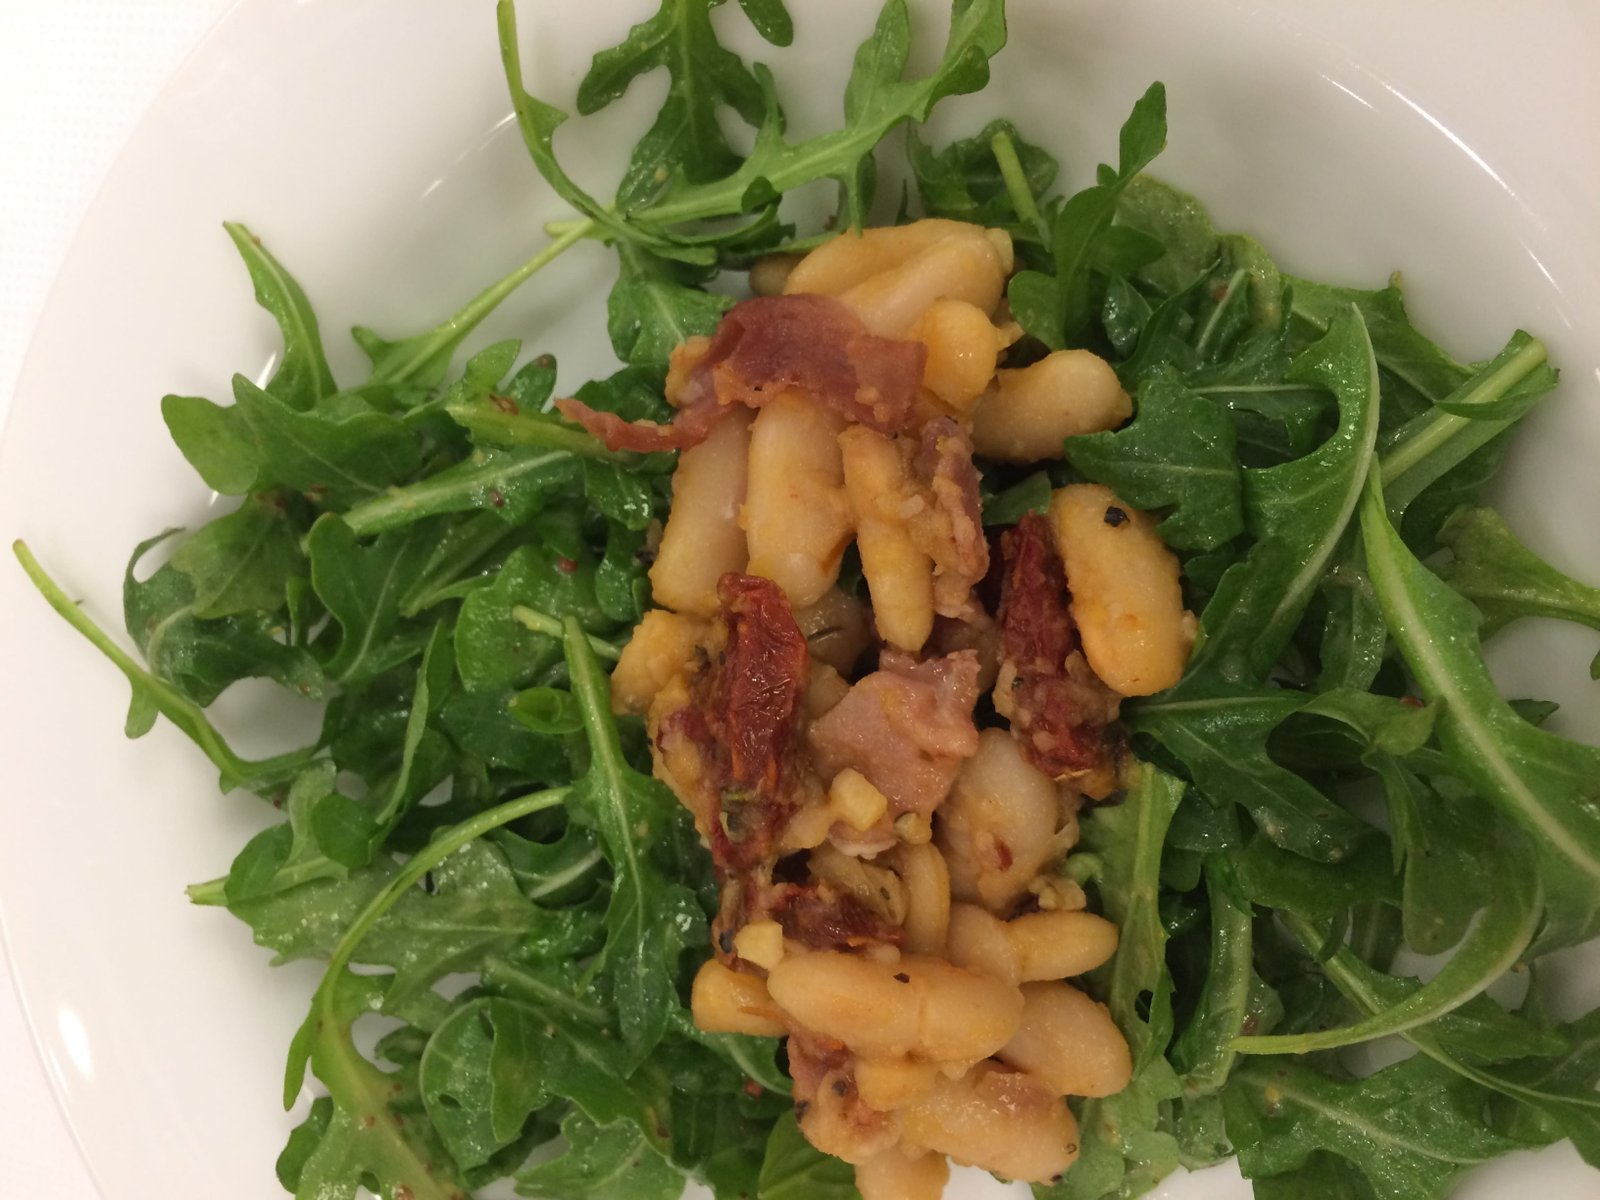 Arugula Salad with White Beans and Prosciutto